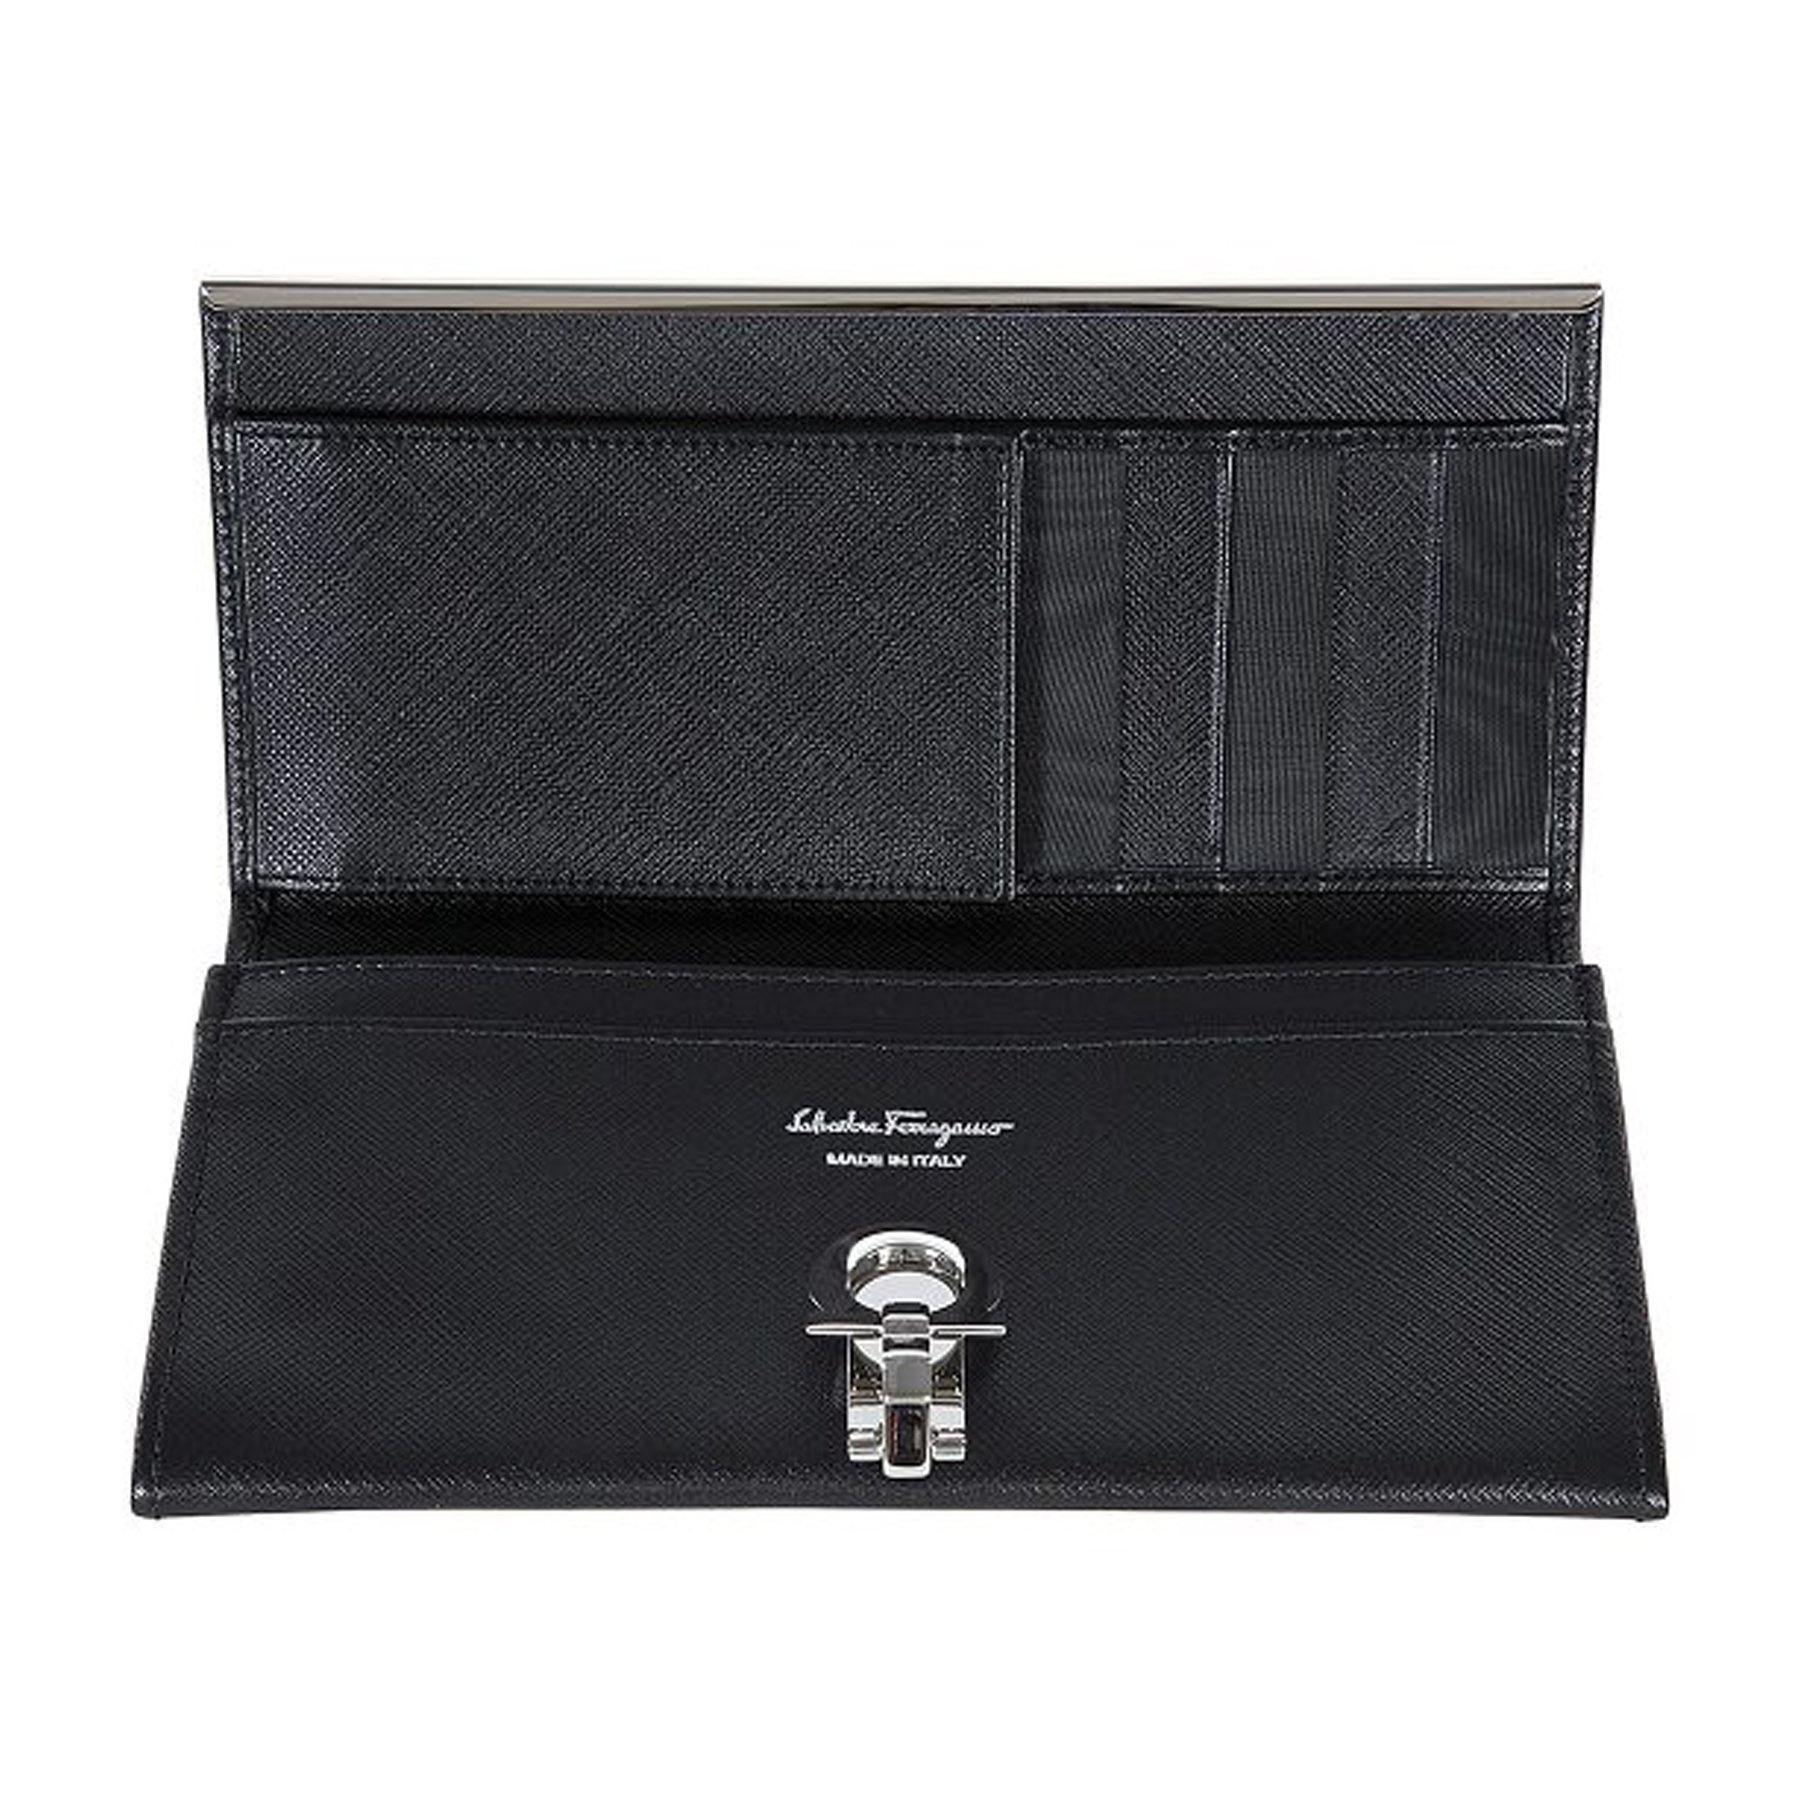 Gancini Continental Wallet 22 4633 - Cosmos Boutique New Jersey